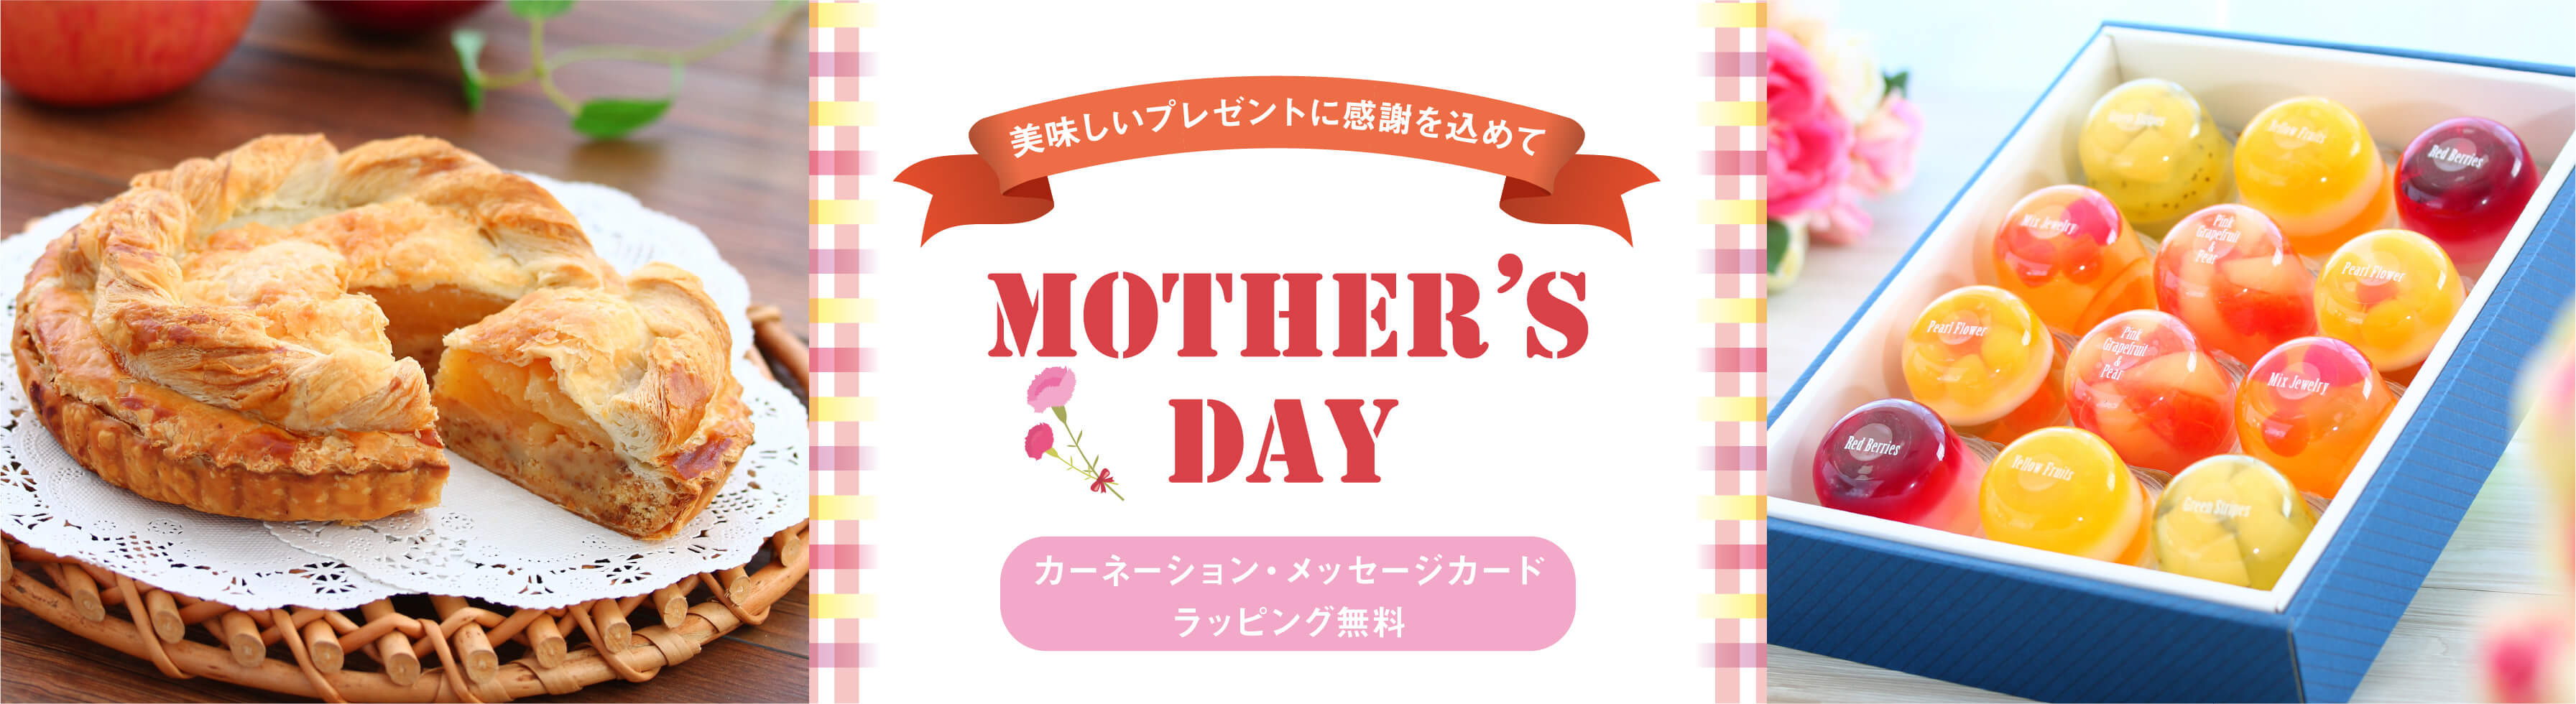 Happy Mother's Day!軽井沢ファーマーズギフトの母の日プレゼント・ギフト2024年。